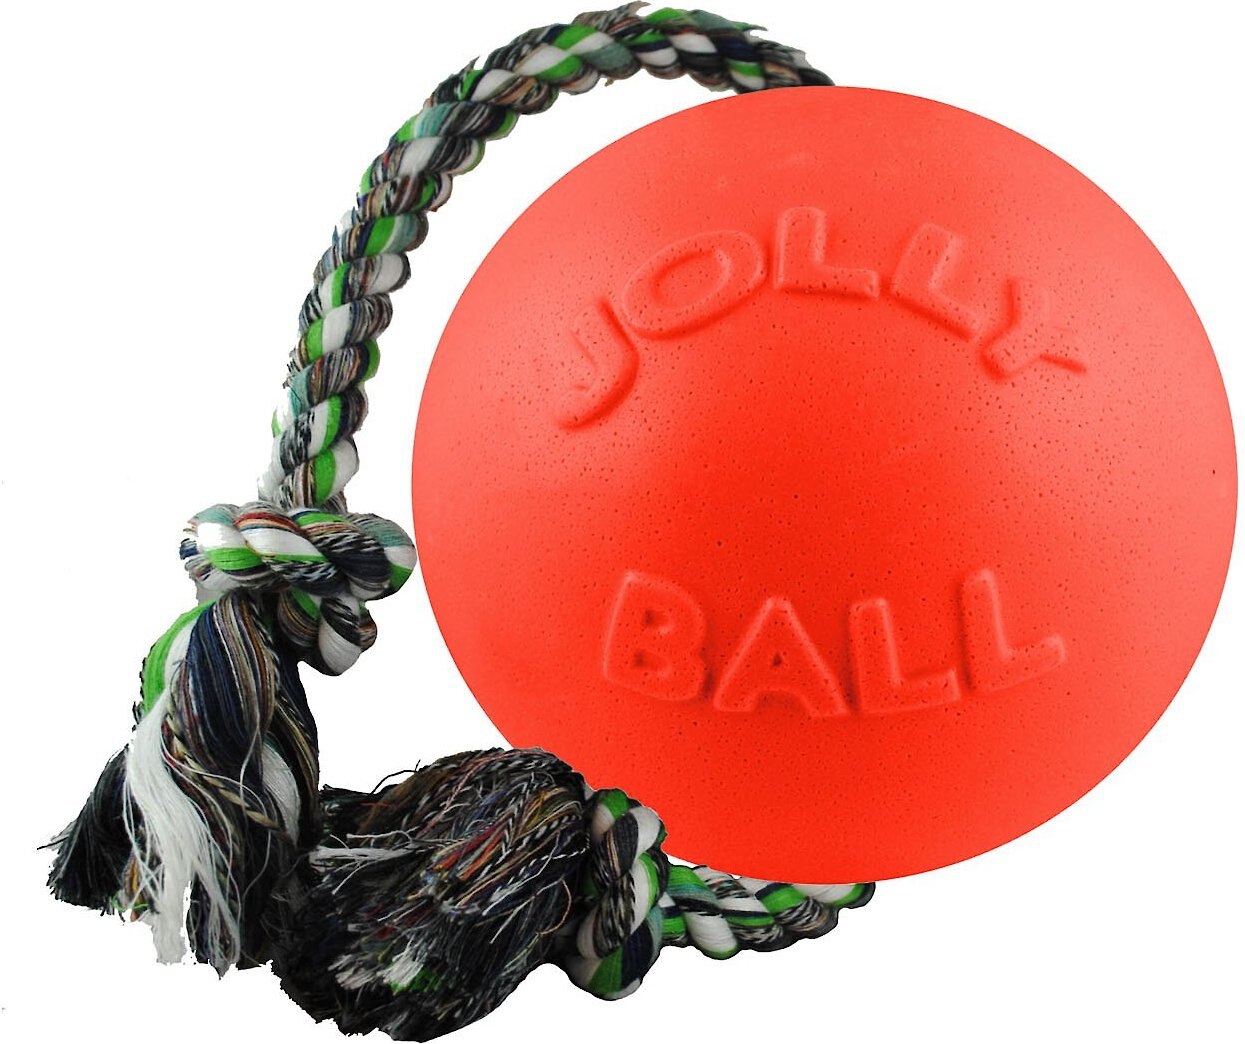 Jolly Pets Soccer Ball Orange 6 inchVanilla Scented Rubber Chew Toy for Dogs 